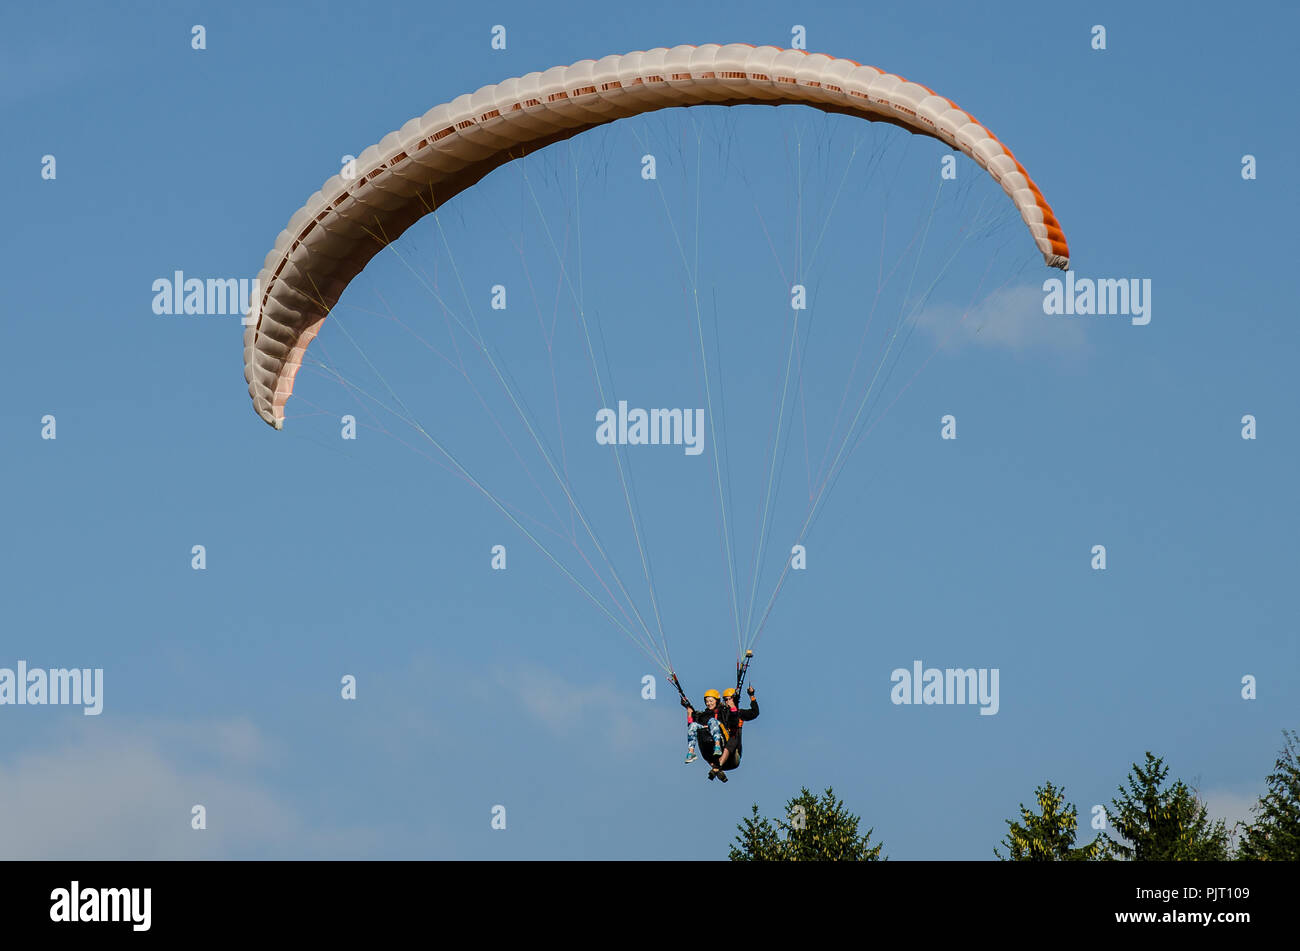 Paragliding is one of the most awe-inspiring adventure sports practiced today. The scenic views make paragliding an experience of a lifetime. Stock Photo